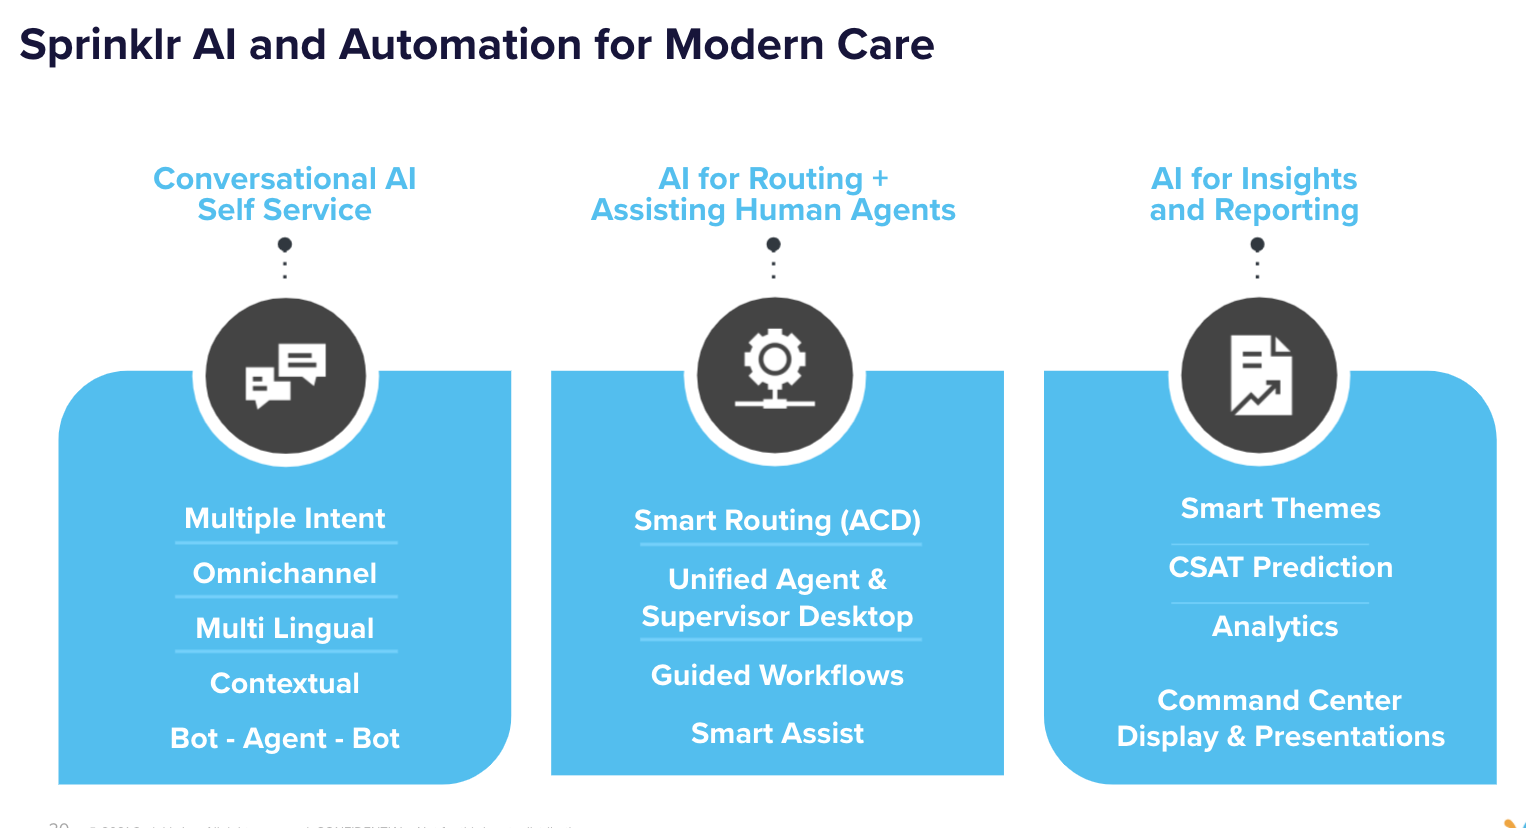 An infographic showing how Sprinklr AI capabilities for customer service